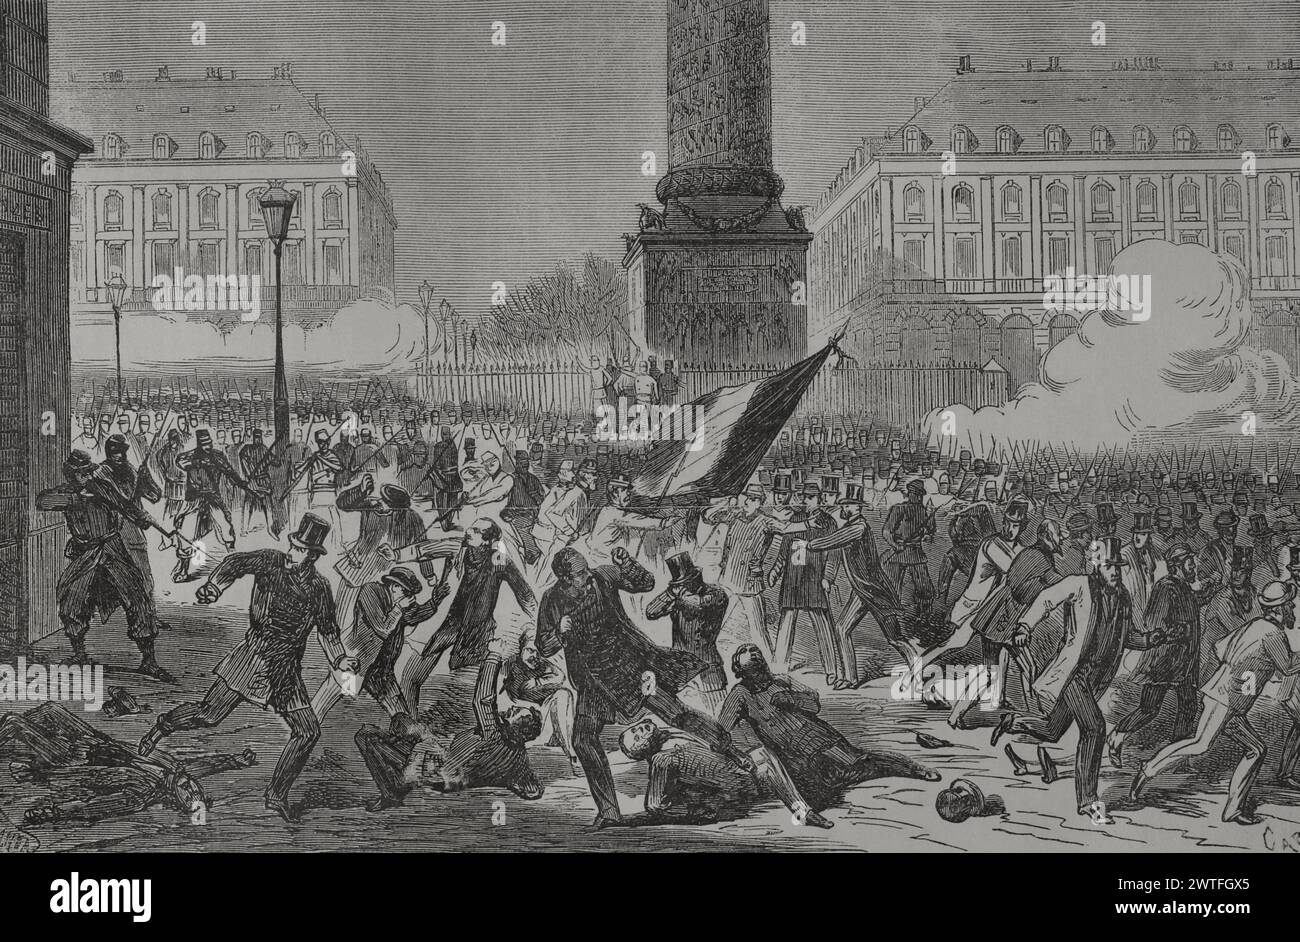 France. Paris Commune. Popular revolutionary movement that took power in Paris from 18 March to 28 May 1871, during the Franco-Prussian War. Massacre of supporters of the 'Party of Order' (conservatives) in the Place Vendôme in Paris, 22 March 1871. The so-called 'Friends of Order', also 'Friends of Peace', held a demonstration in front of the headquarters of the National Guard, demanding the expulsion of the headquarters of the 'federates' from the Place Vendôme. They disarmed and attacked two sentries, provoking the reaction of two hundred federates in the square, who clashed with the demons Stock Photo